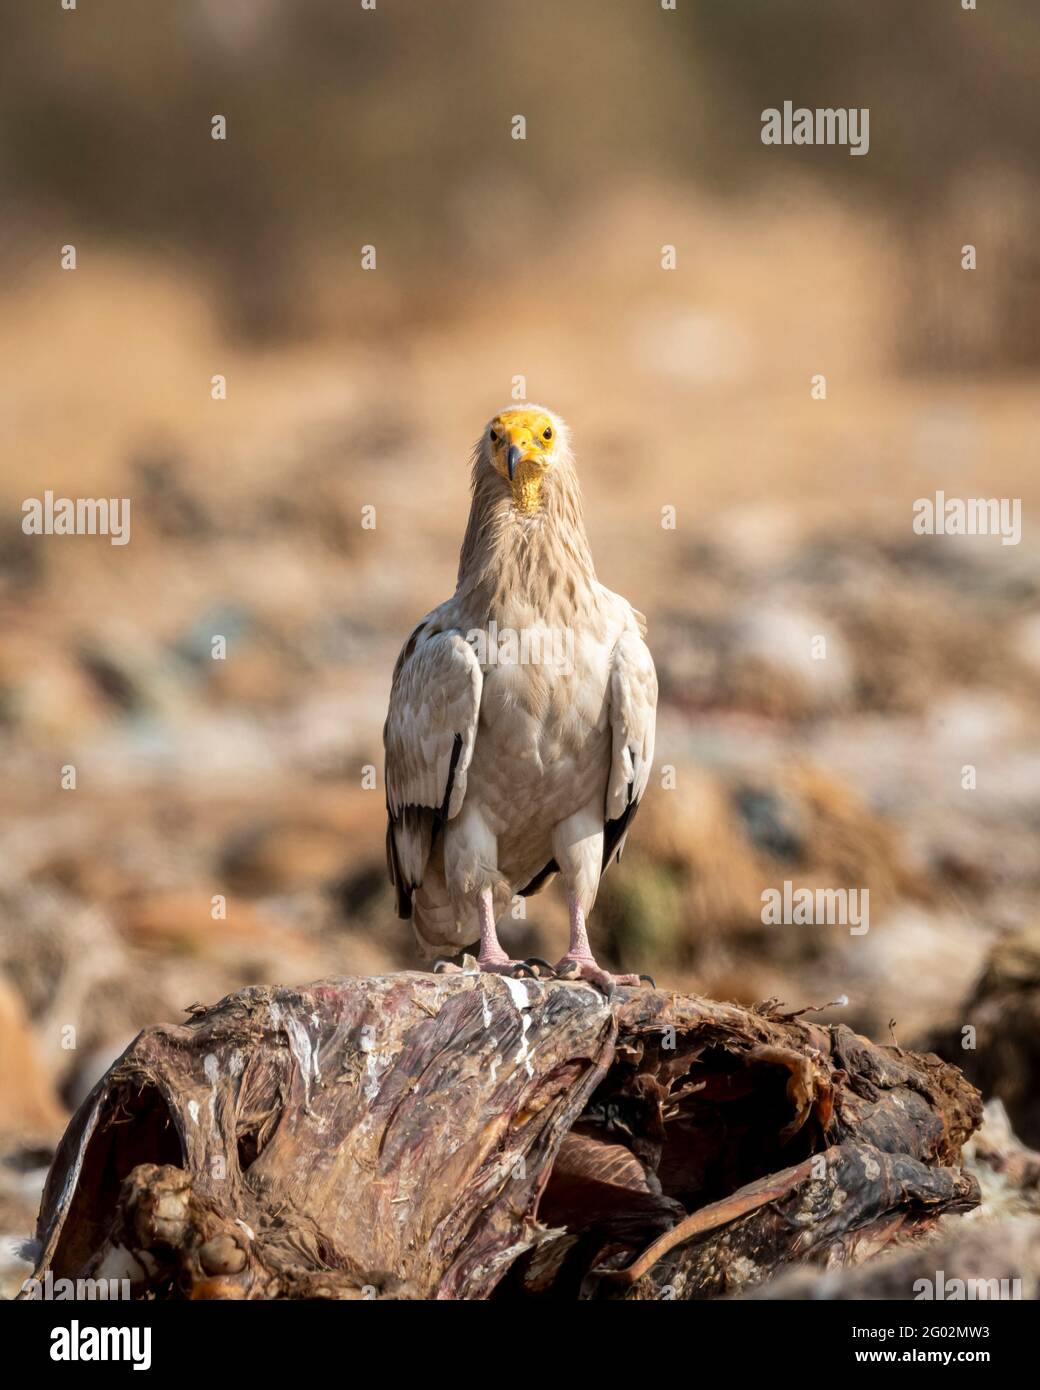 Egyptian vulture or Neophron percnopterus perched on carcass of a animal in clean background at jorbeer conservation reserve bikaner rajasthan india Stock Photo